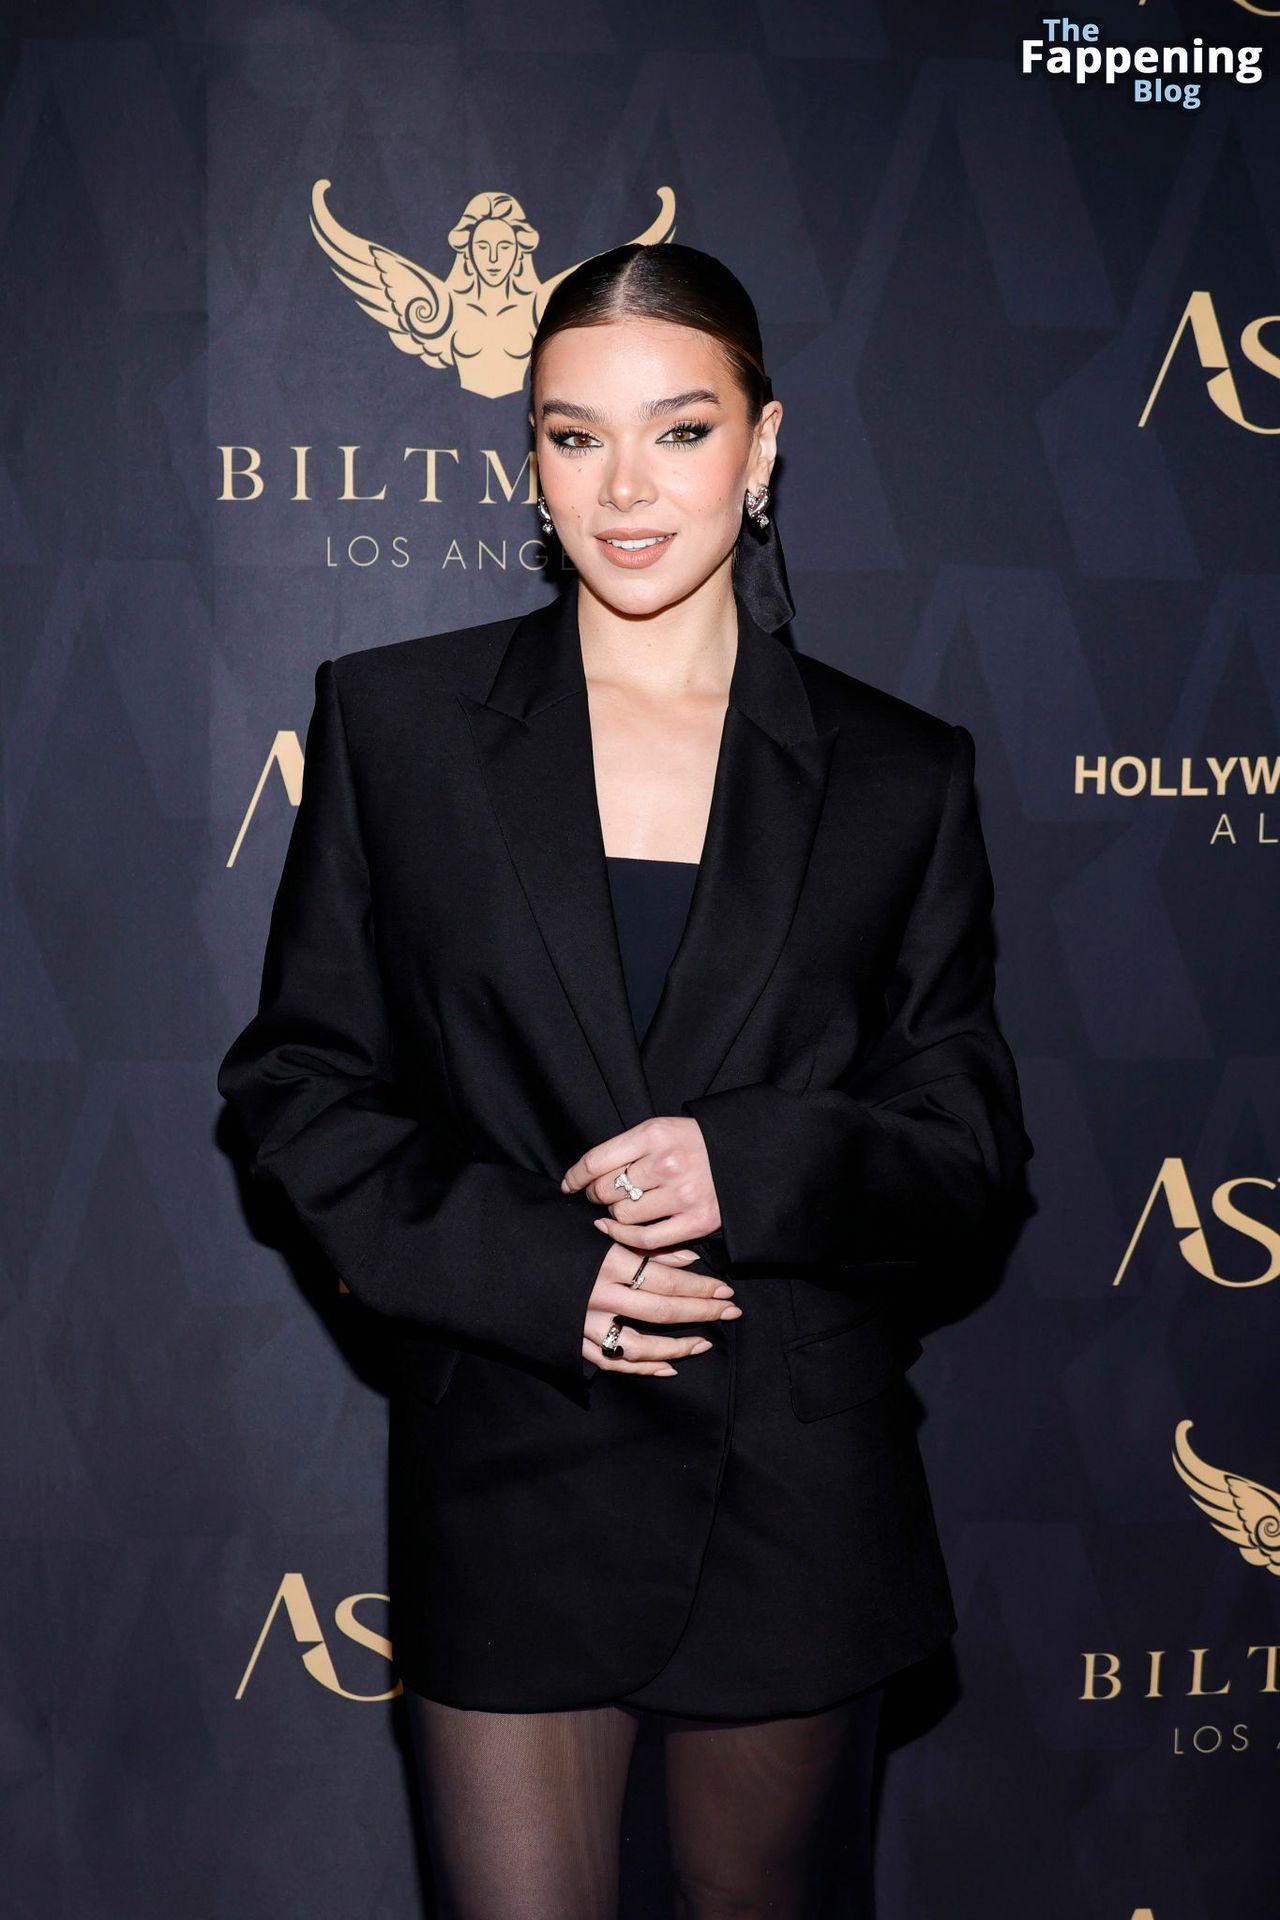 Hailee-Steinfeld-Black-Outfit-Astra-Film-Awards-10-1-thefappeningblog.com_.jpg